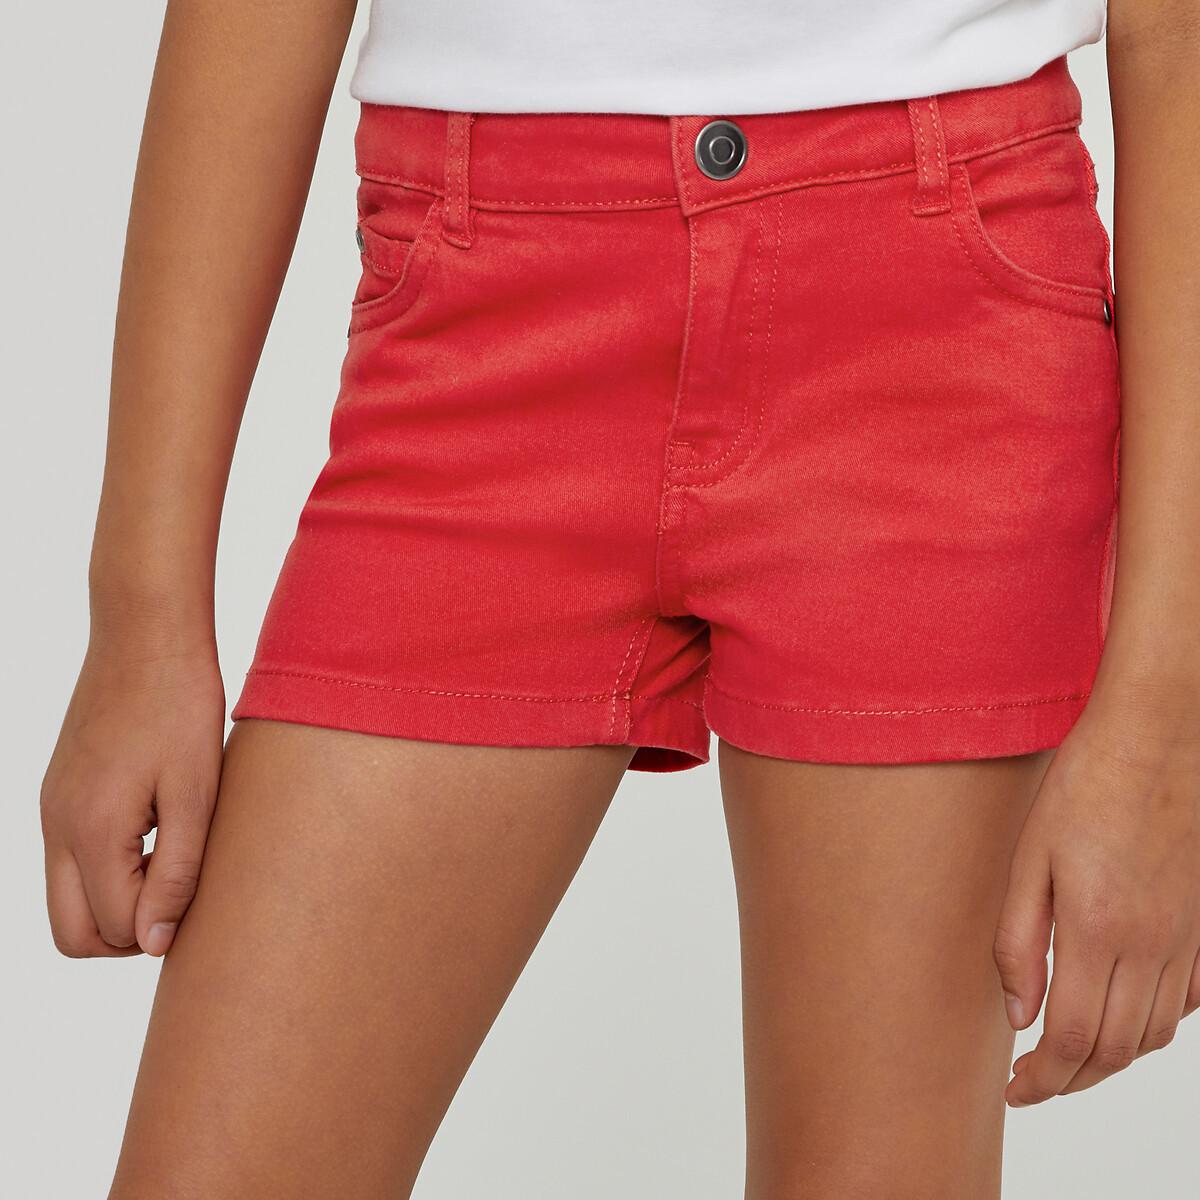 La Redoute Collections  Short 5 poches 